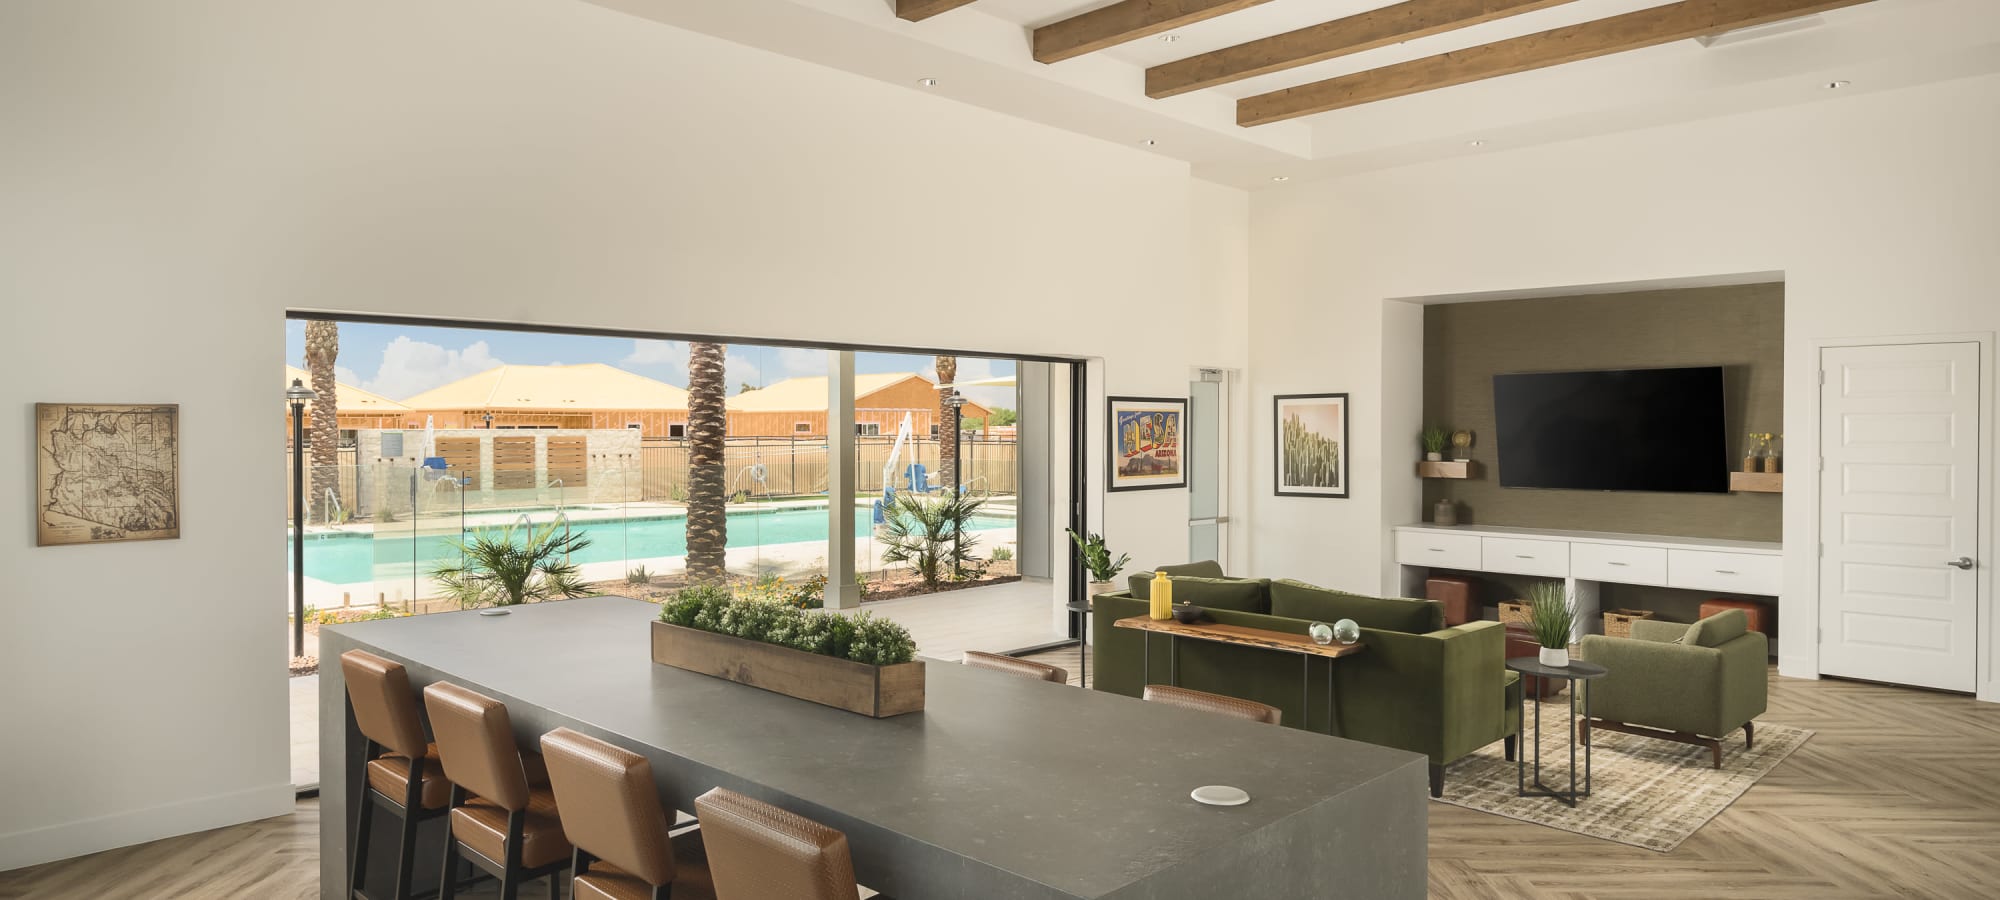 Resident clubhouse overlooking pool at Sobremesa Villas in Surprise, Arizona